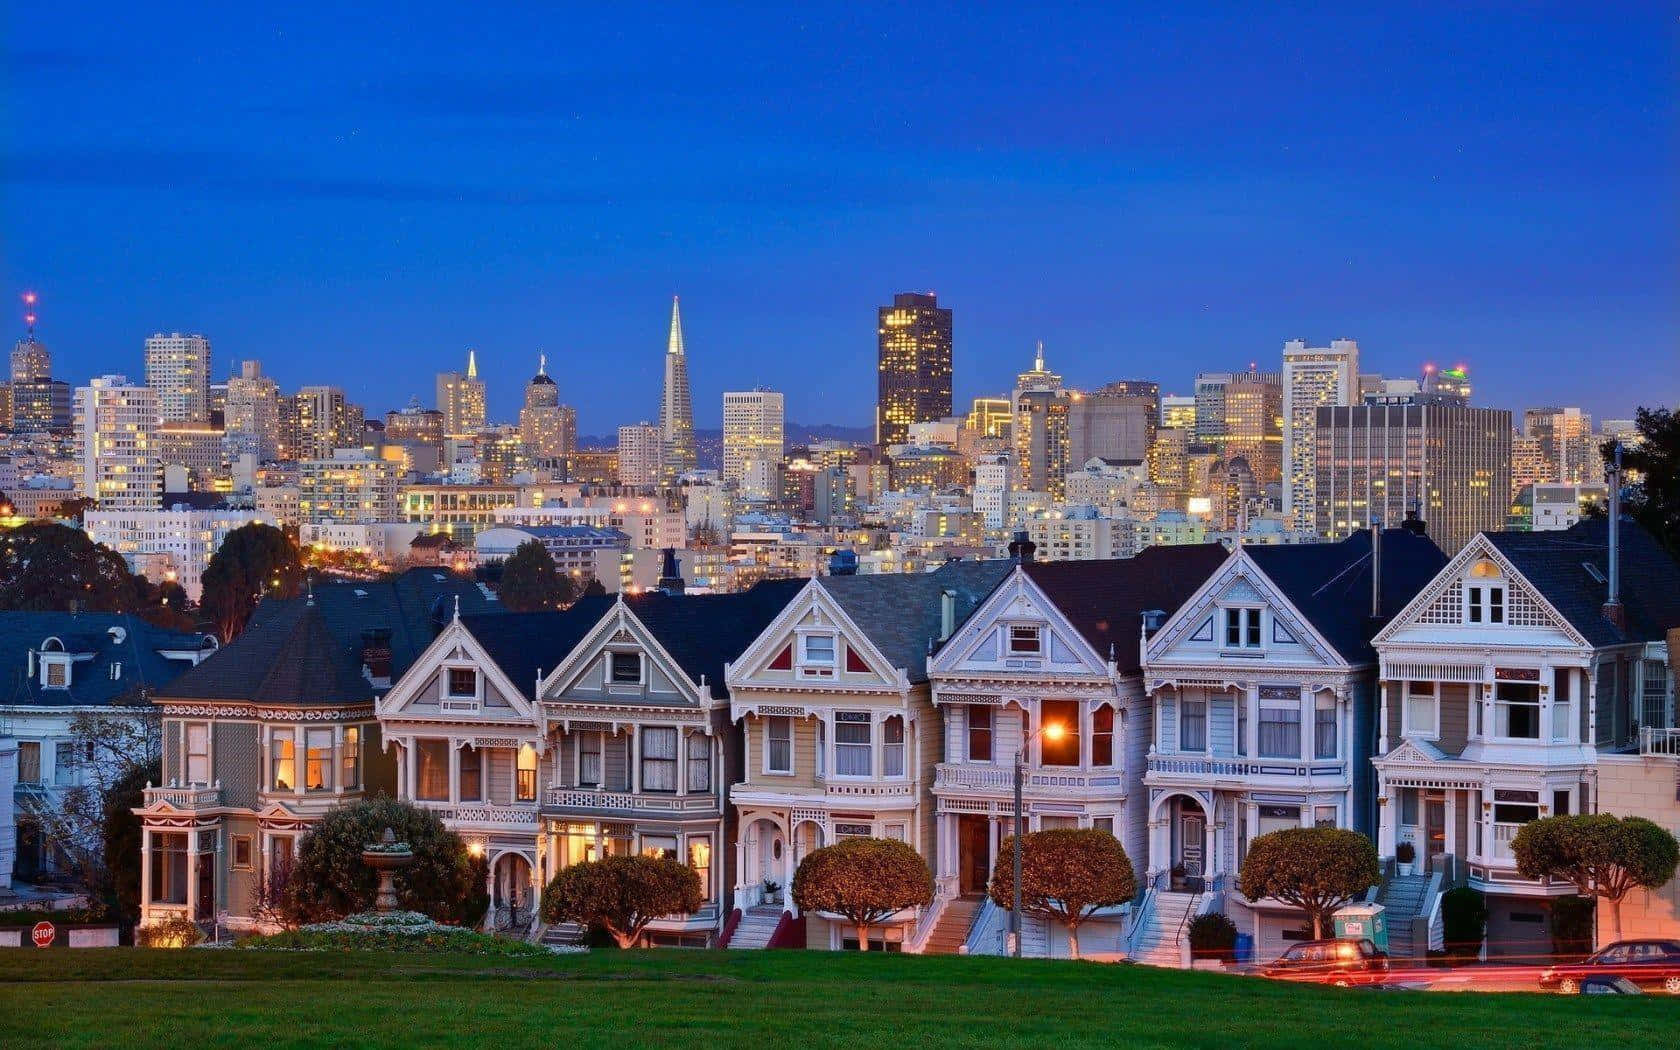 Get Your Work Done Anywhere with a San Francisco Laptop Wallpaper